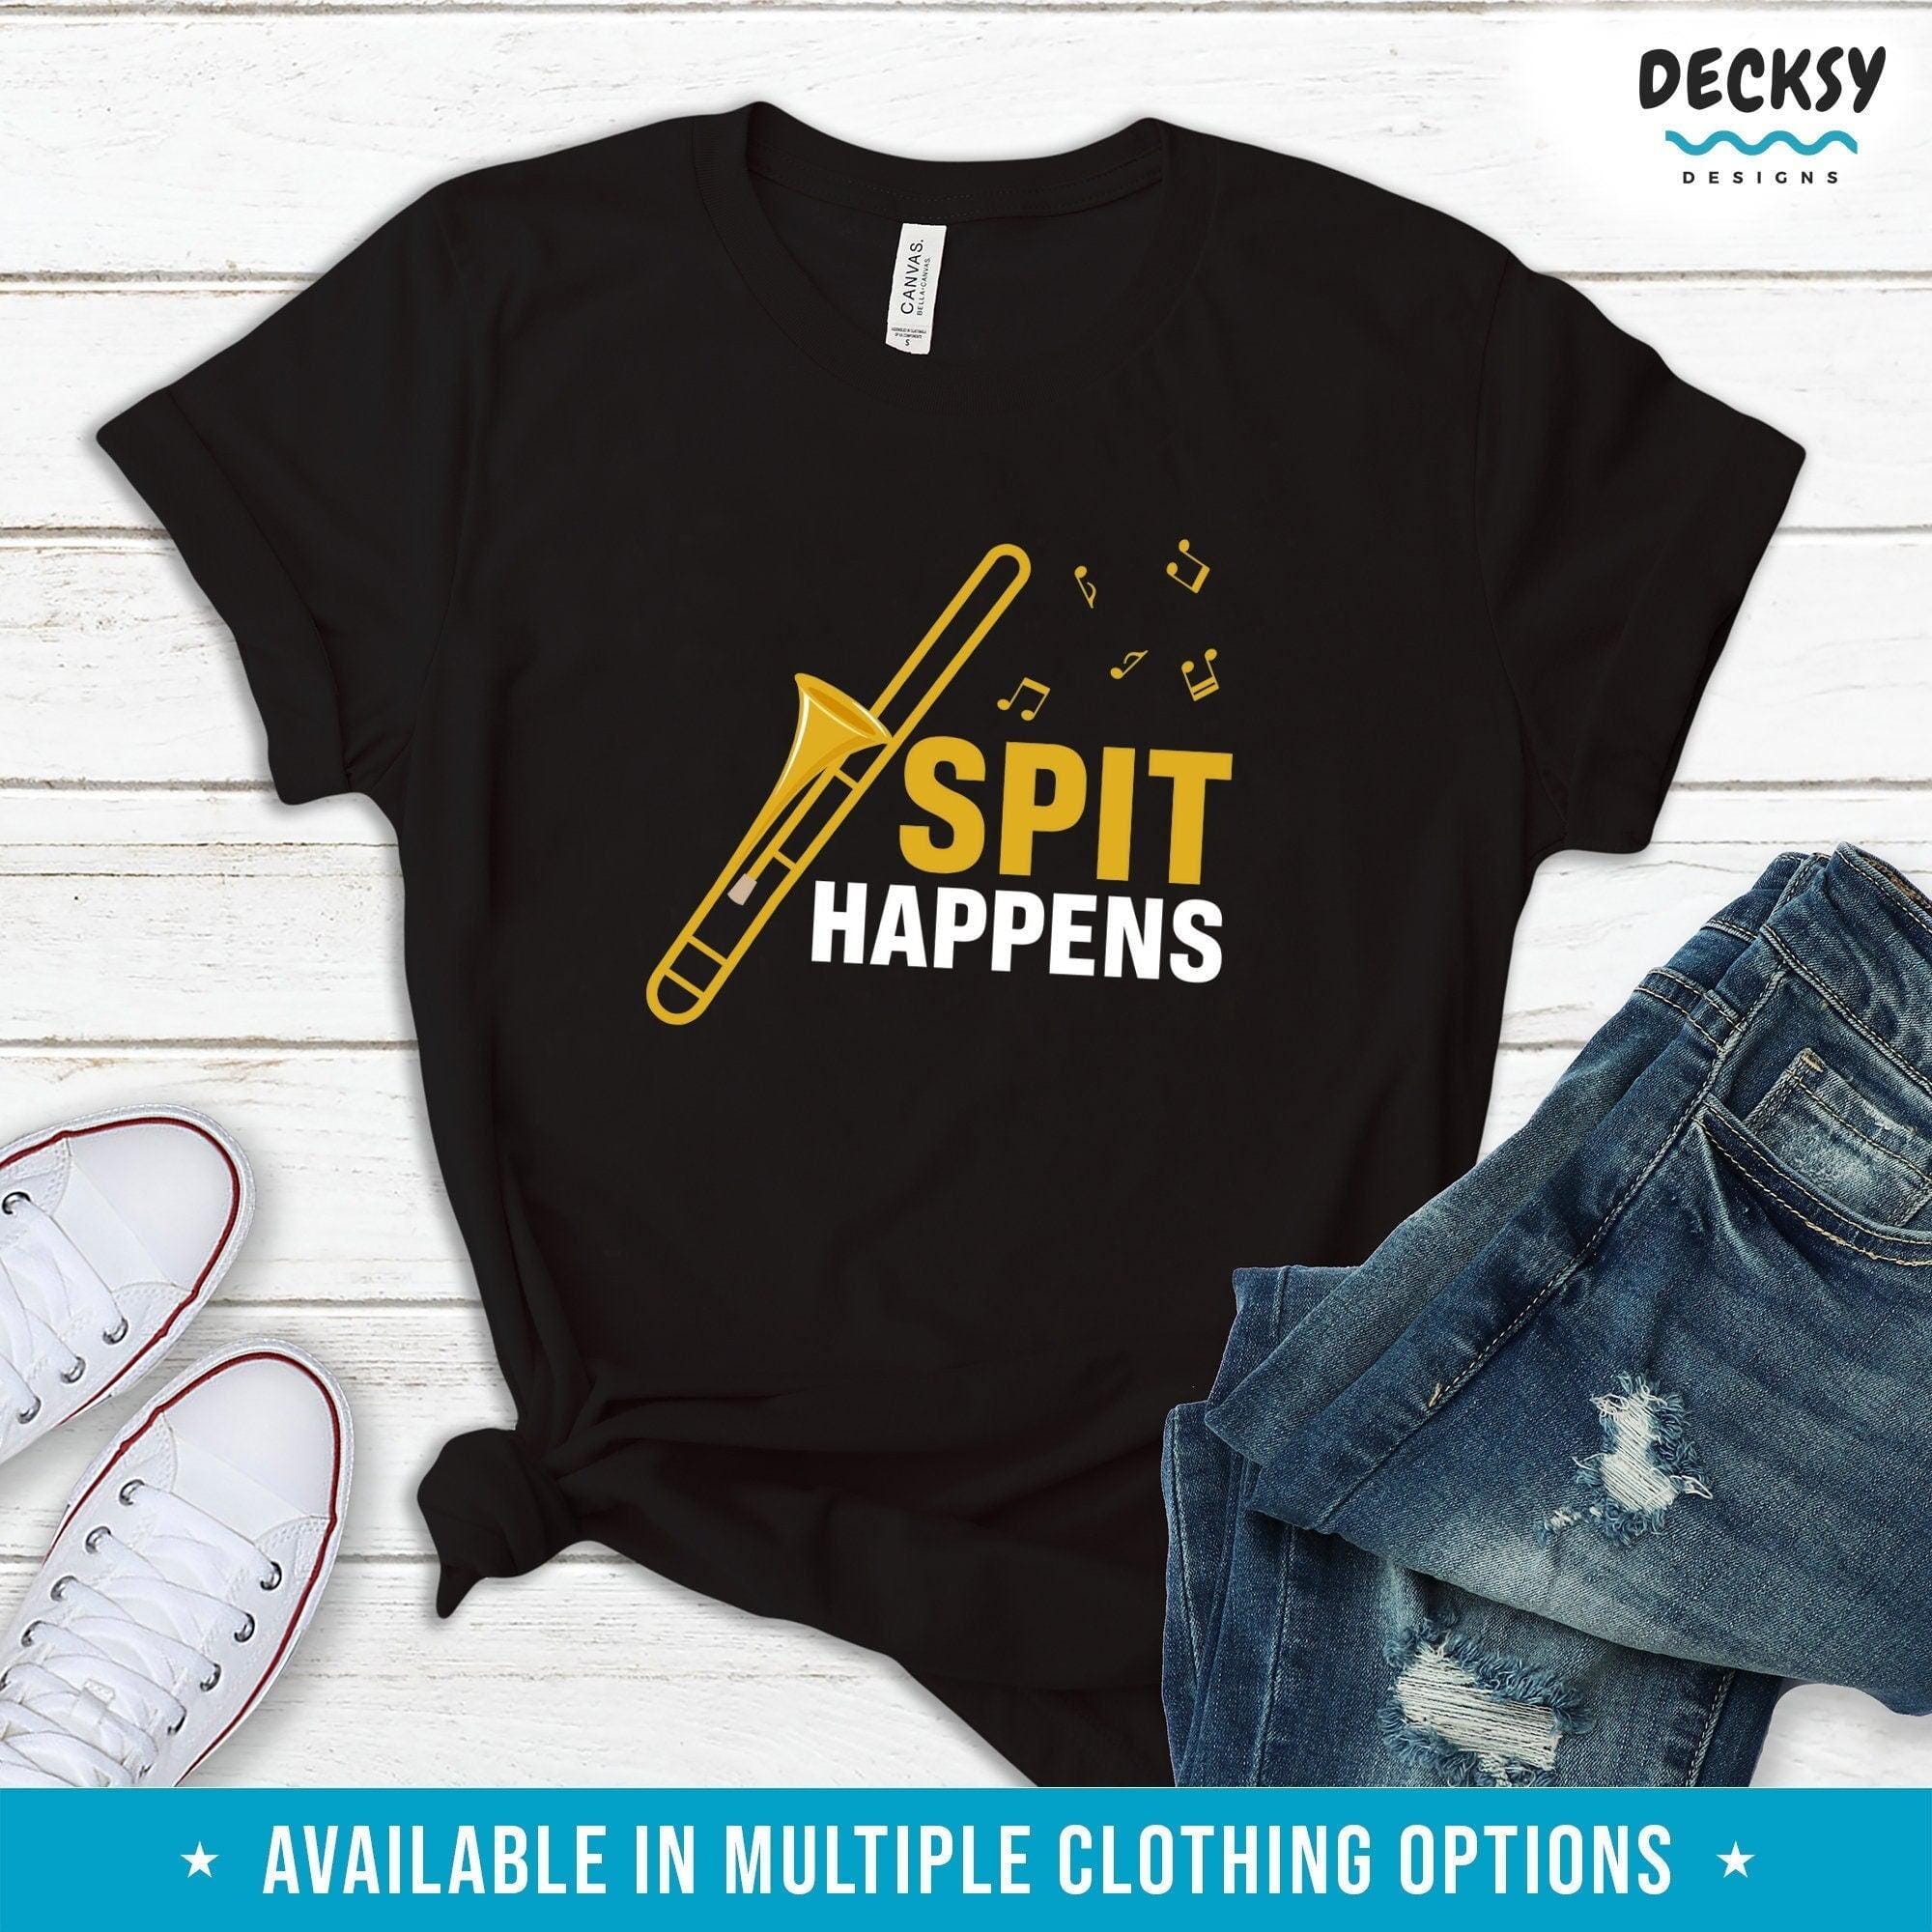 Trombonist Shirt, Trombone Player Gift-Clothing:Gender-Neutral Adult Clothing:Tops & Tees:T-shirts:Graphic Tees-DecksyDesigns